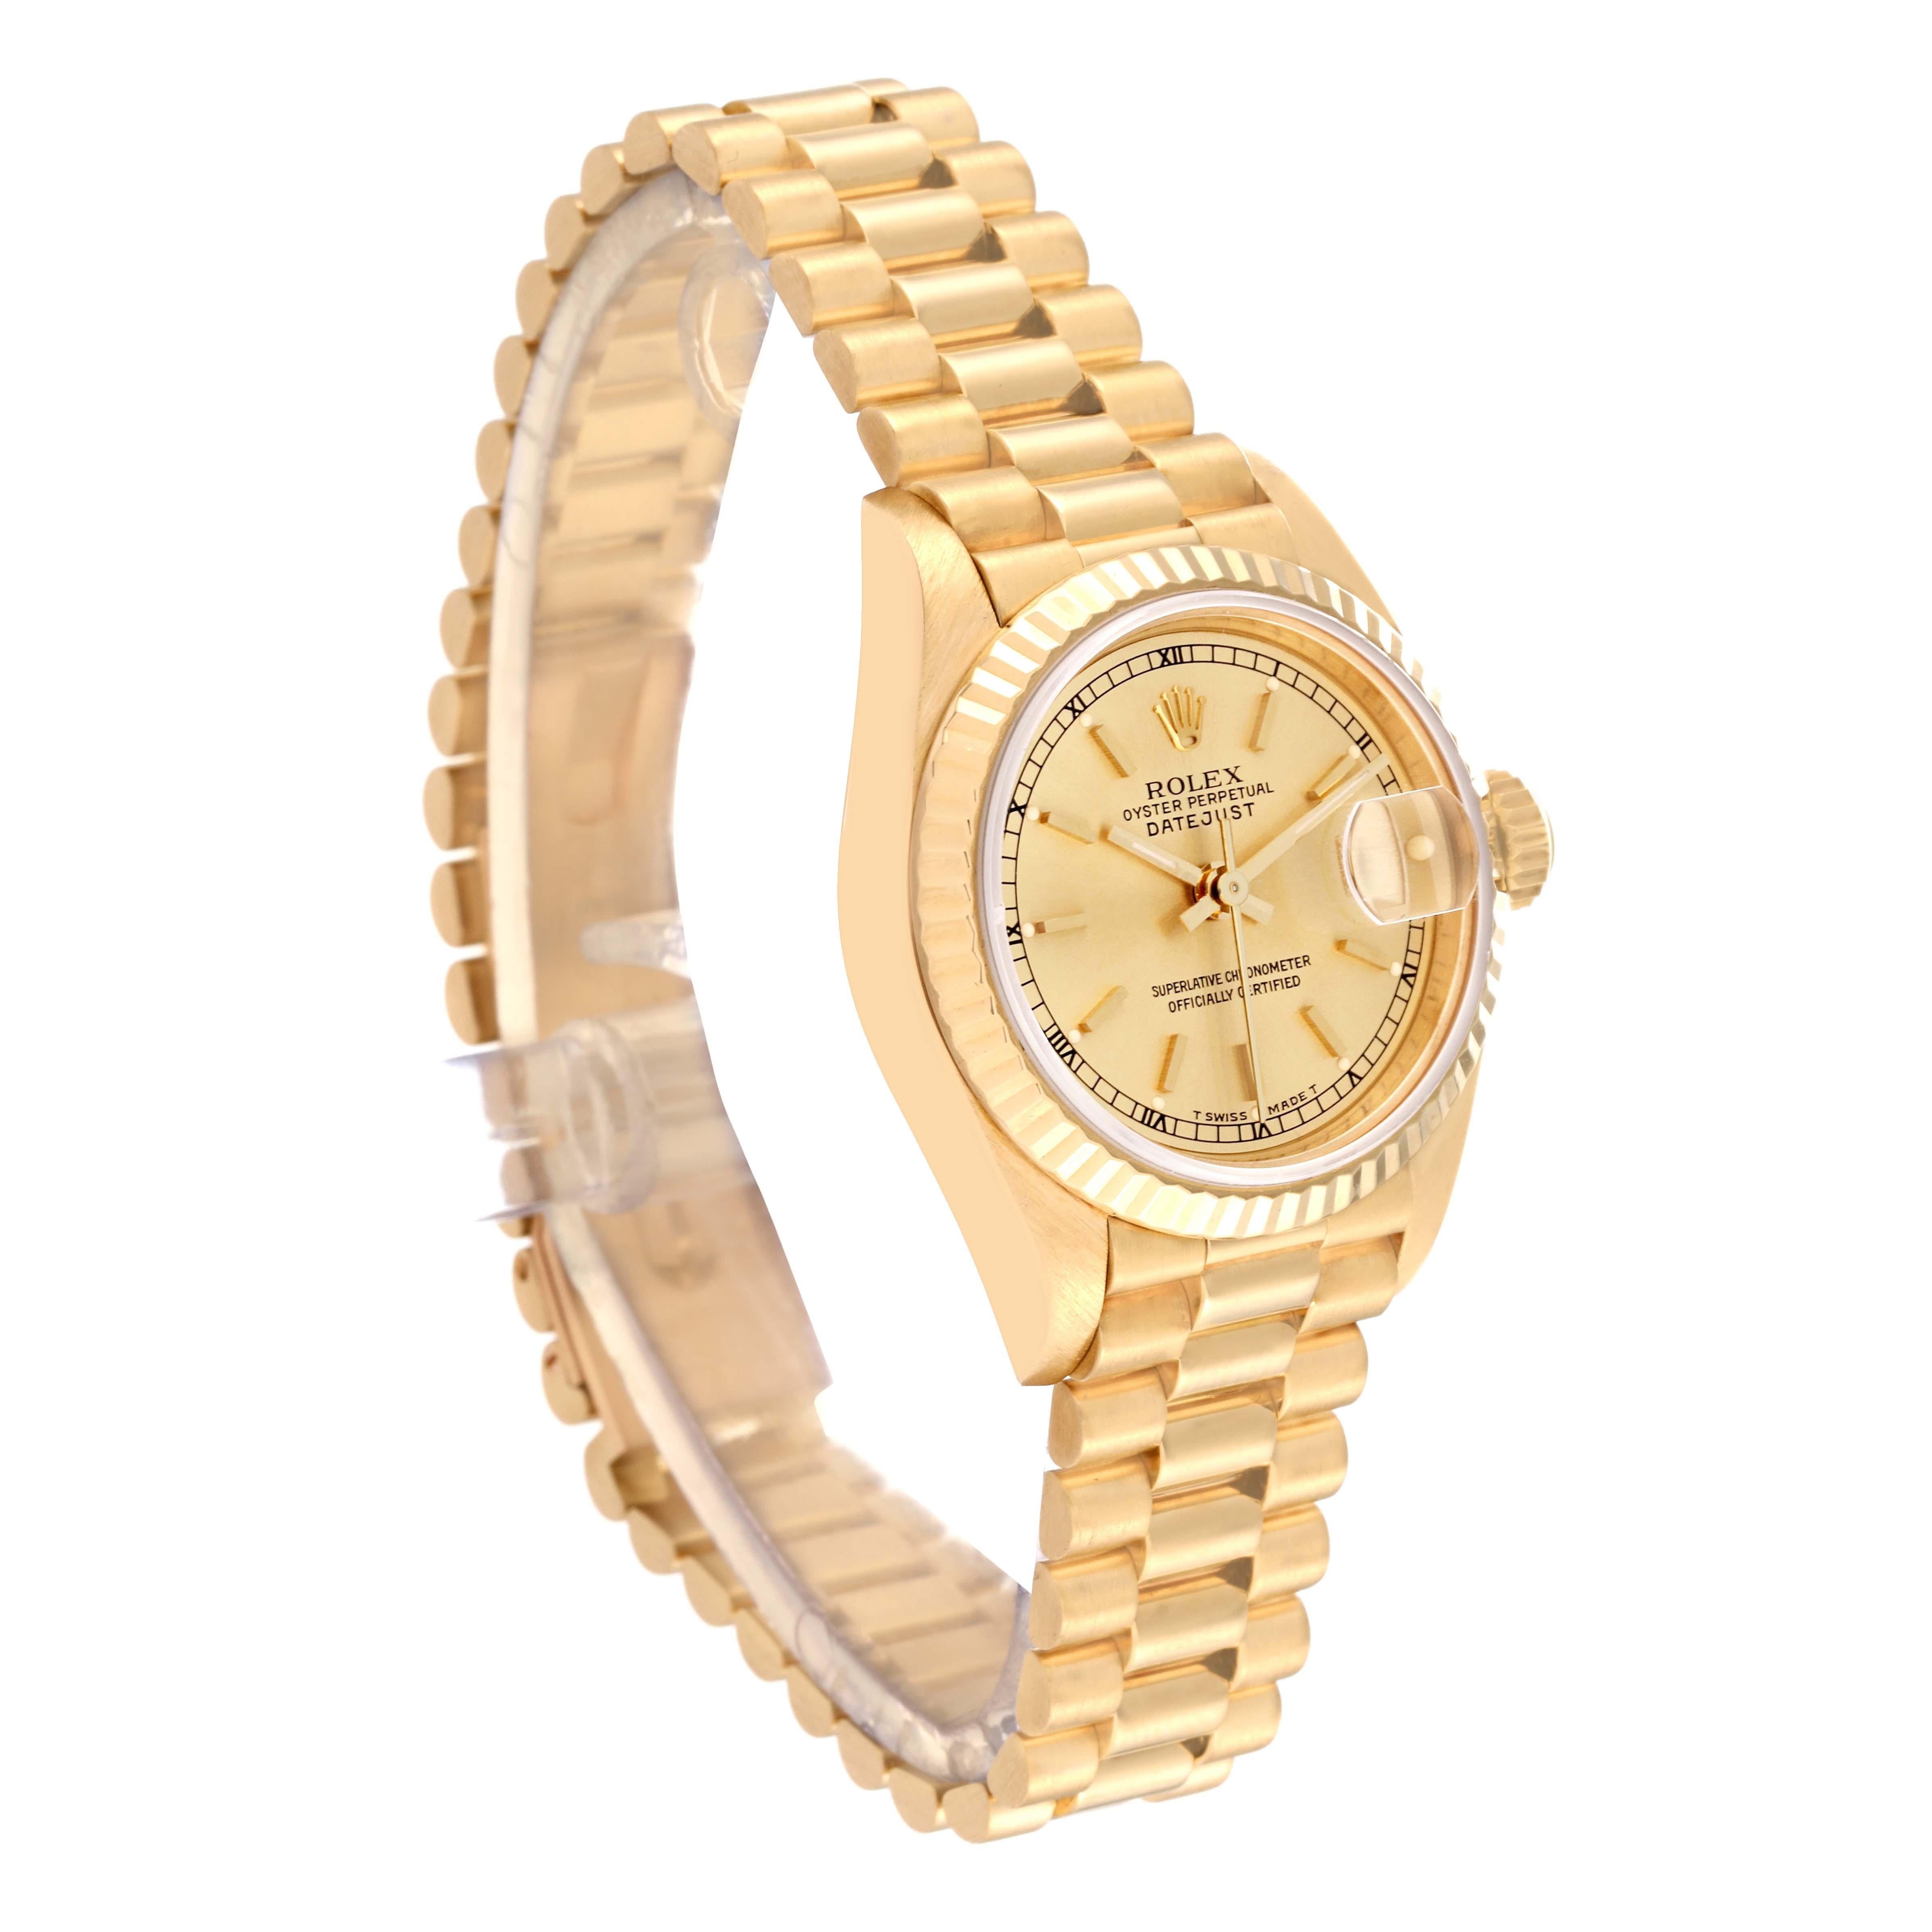 Rolex Datejust President Yellow Gold Ladies Watch 69178 In Excellent Condition For Sale In Atlanta, GA